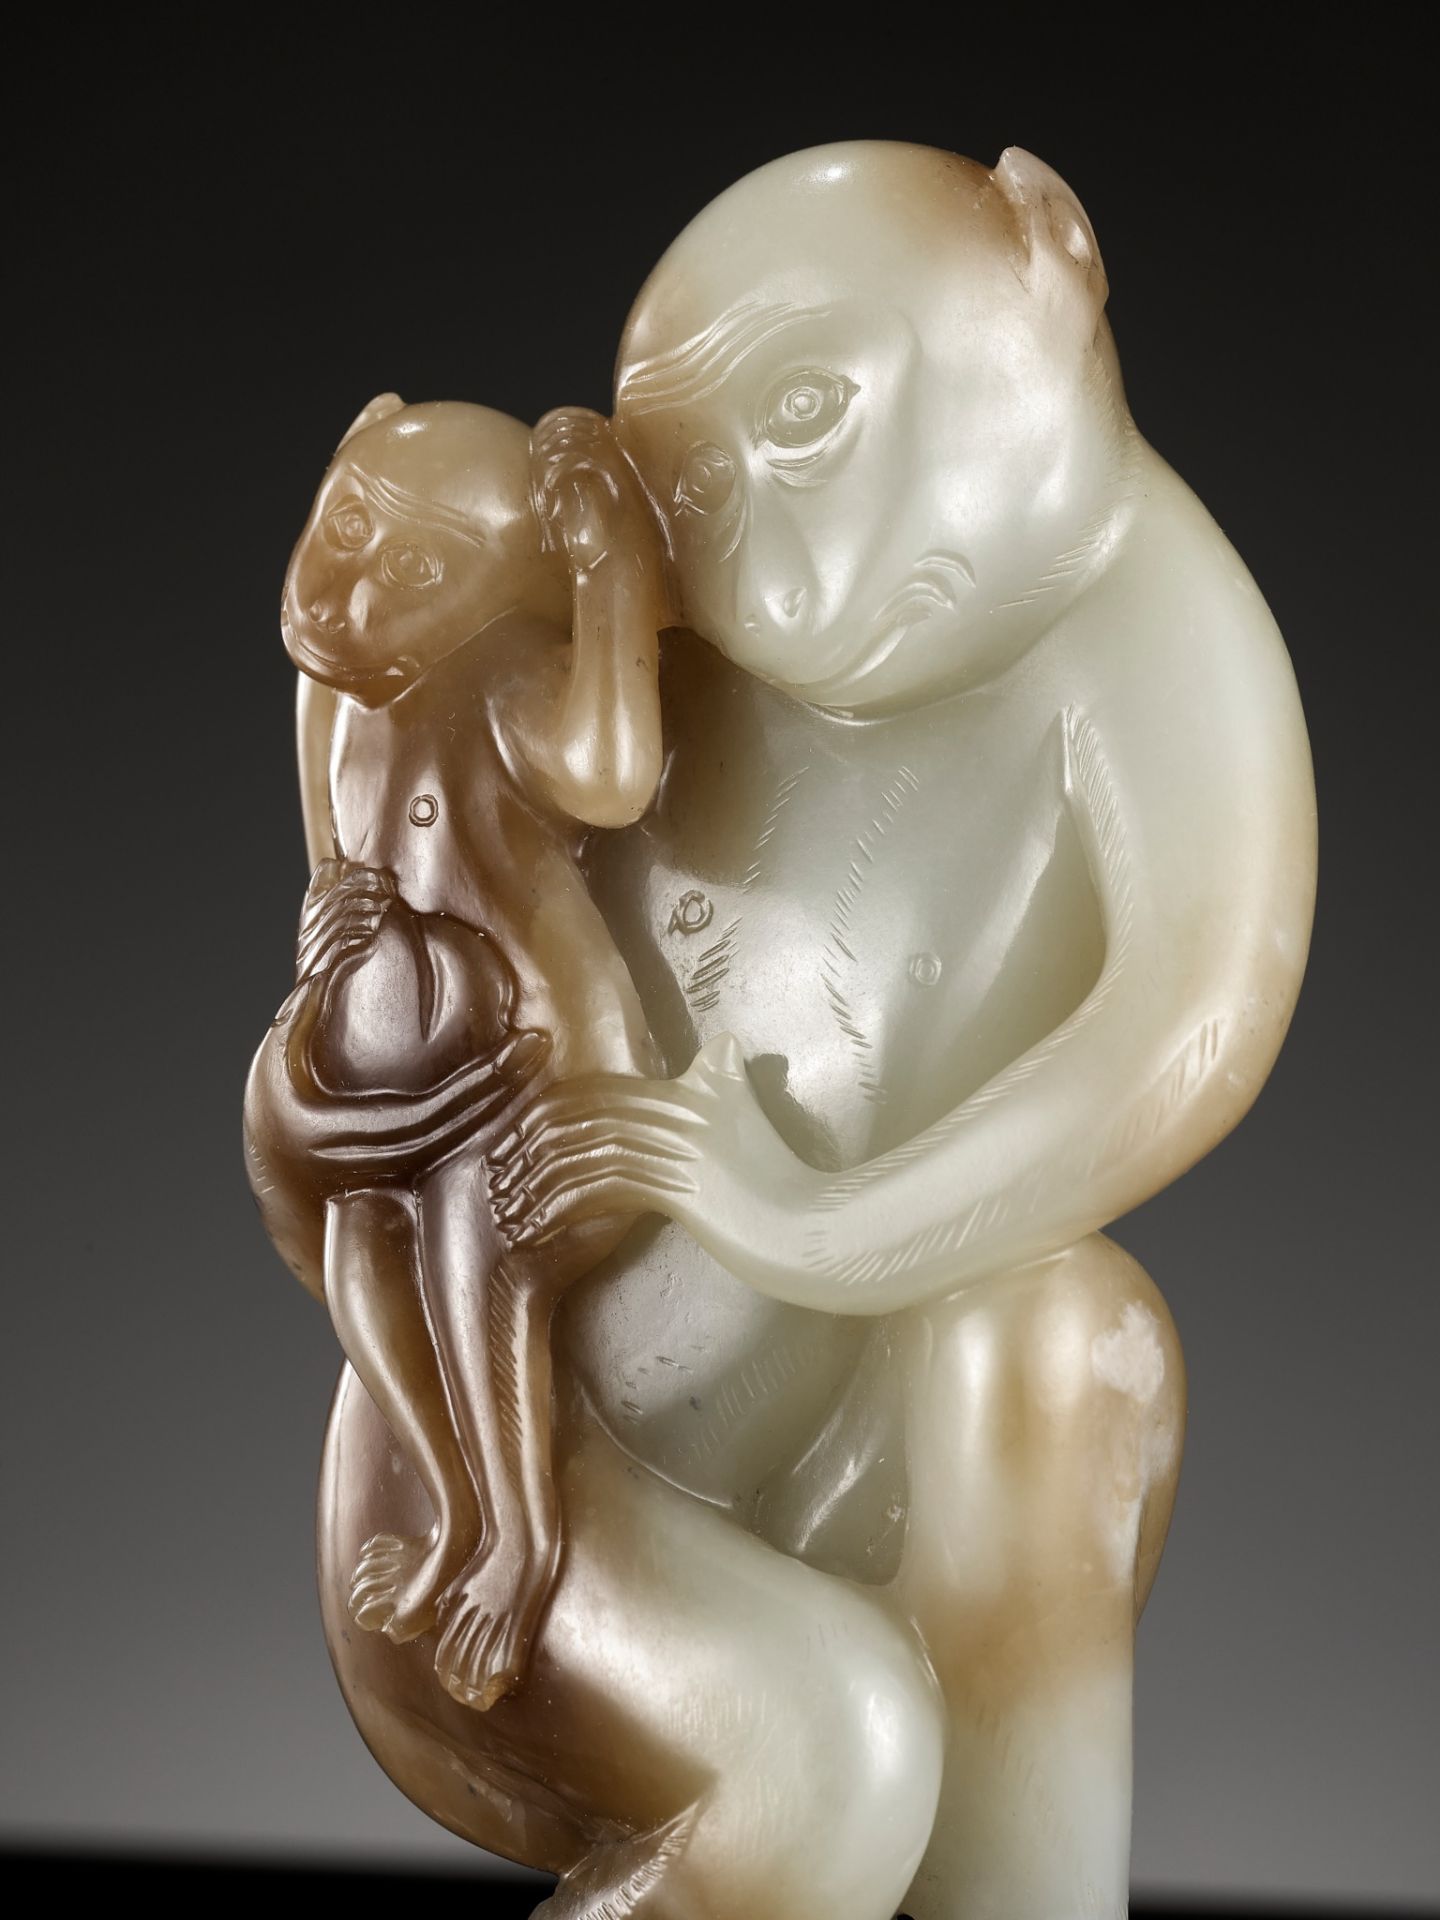 A FINE PALE CELADON AND CHESTNUT BROWN JADE 'MONKEYS AND PEACH' GROUP, 18TH CENTURY